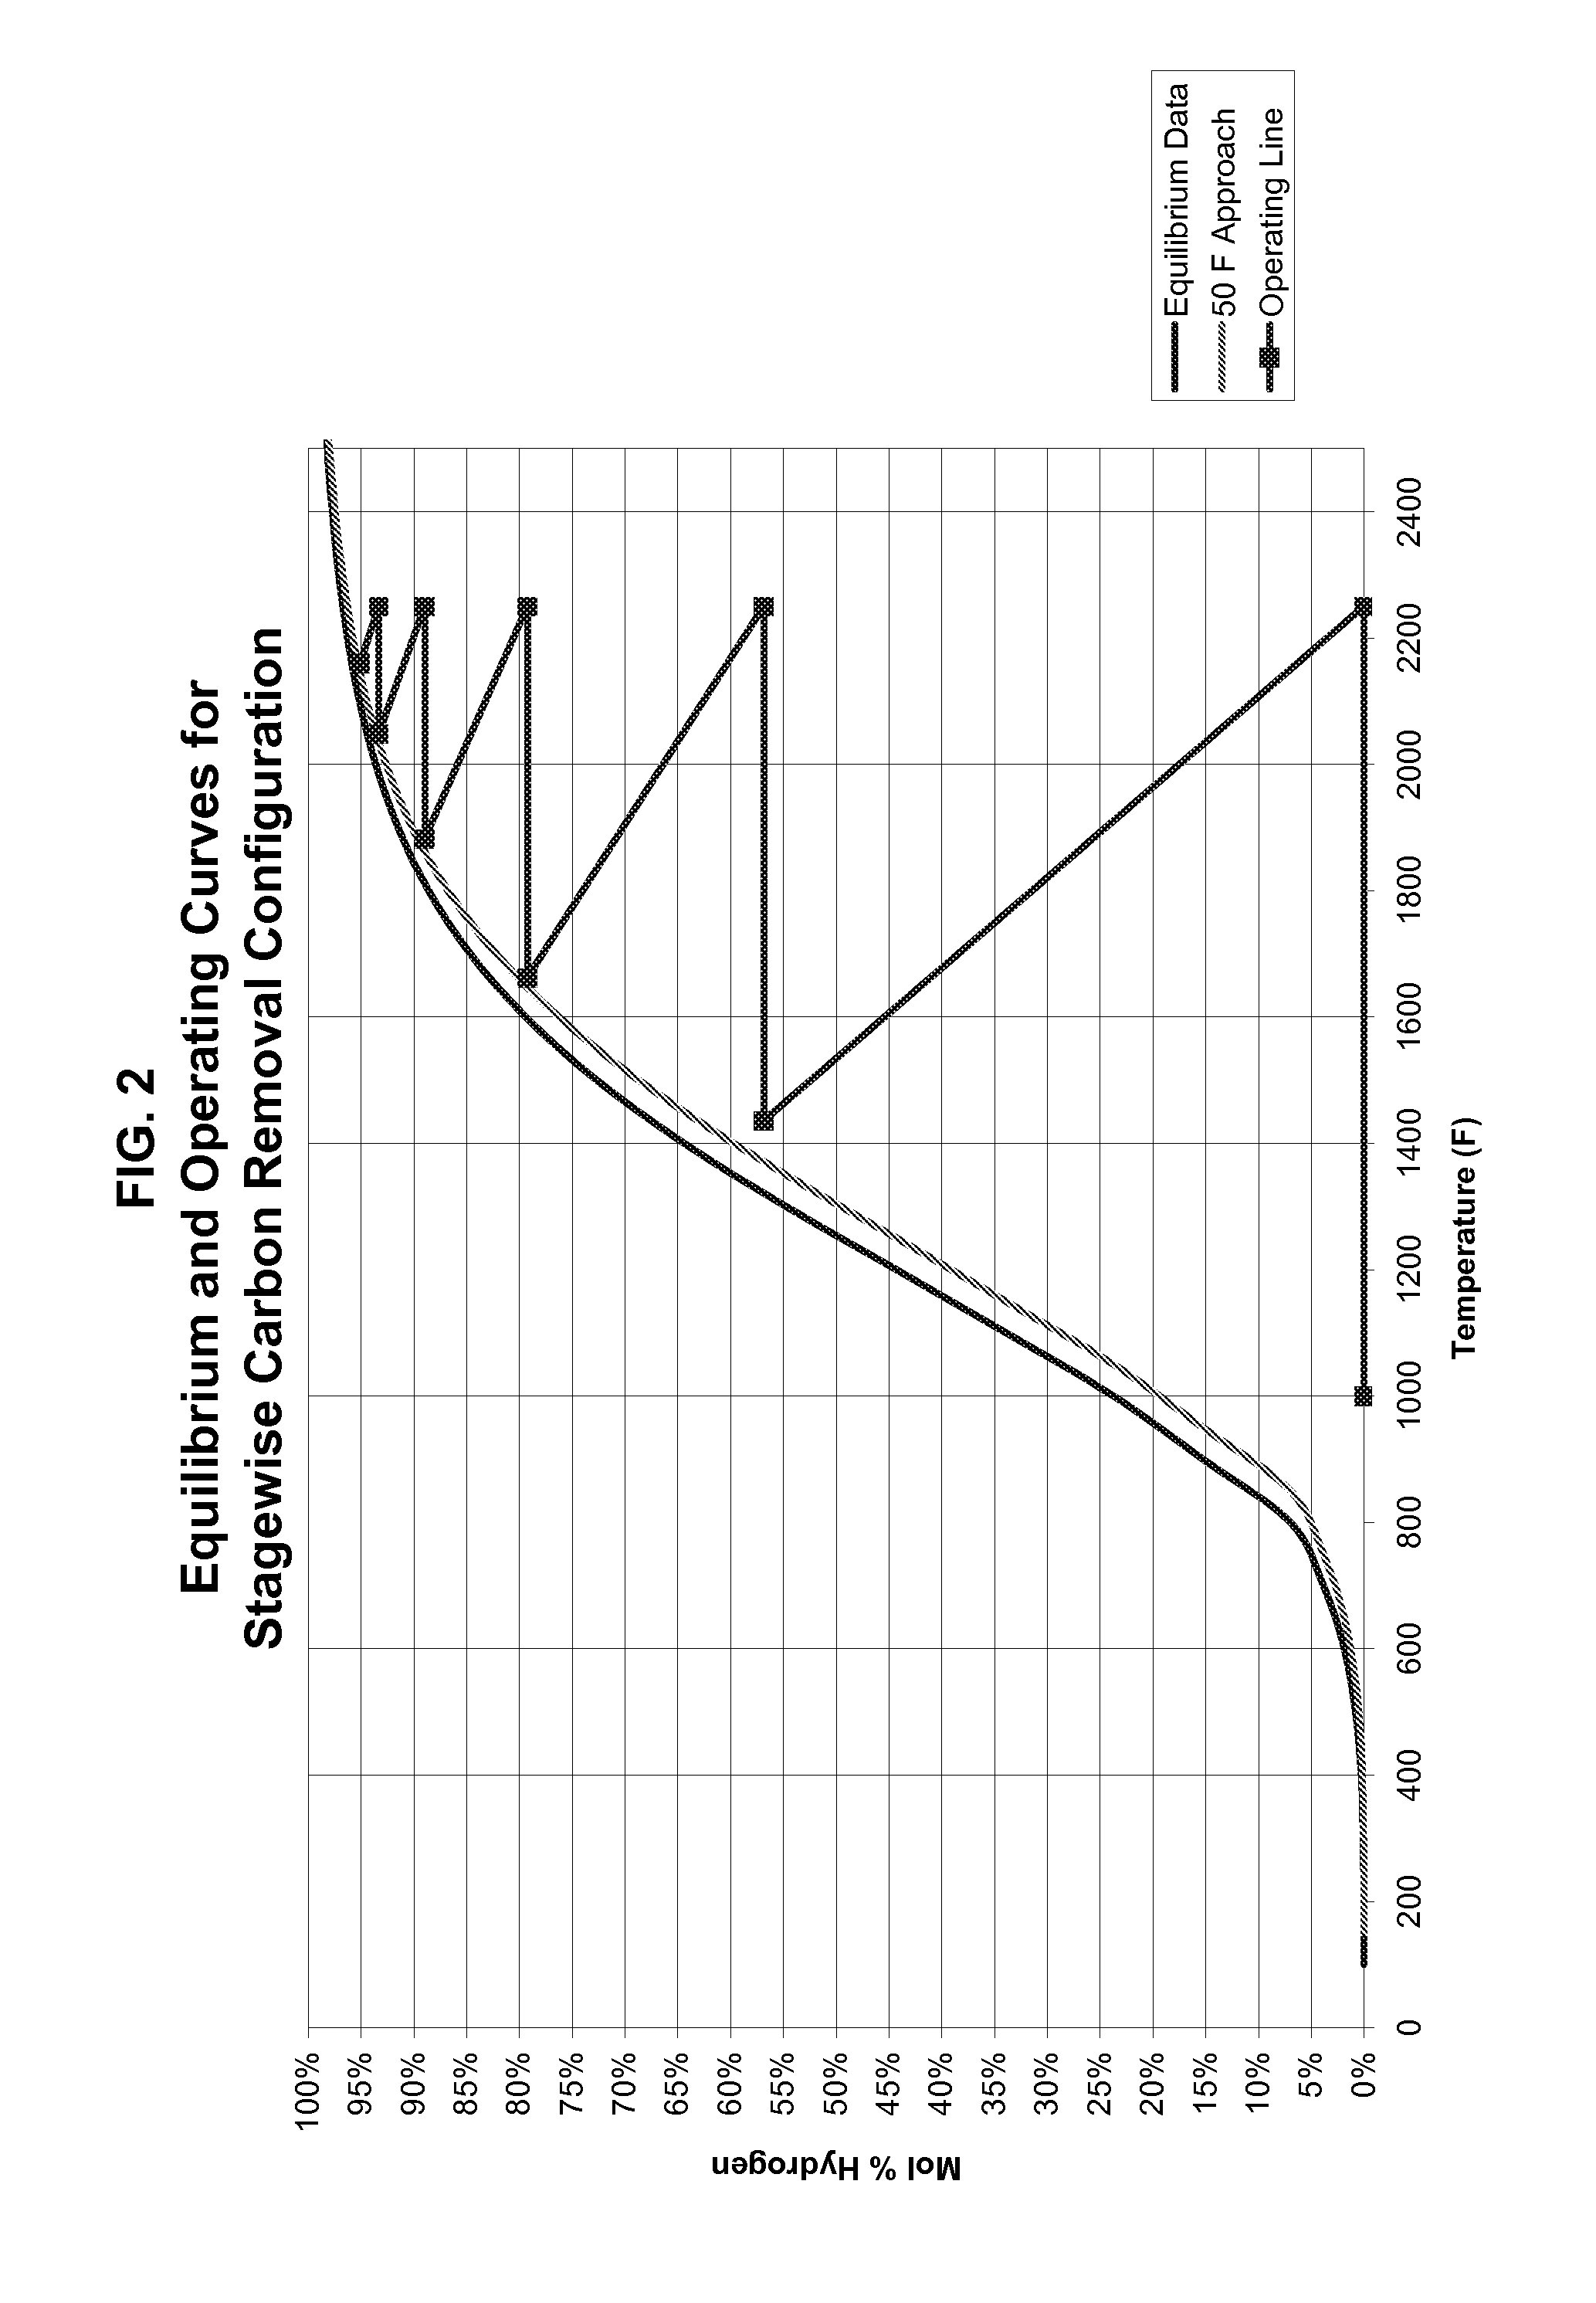 Electric reaction technology for fuels processing